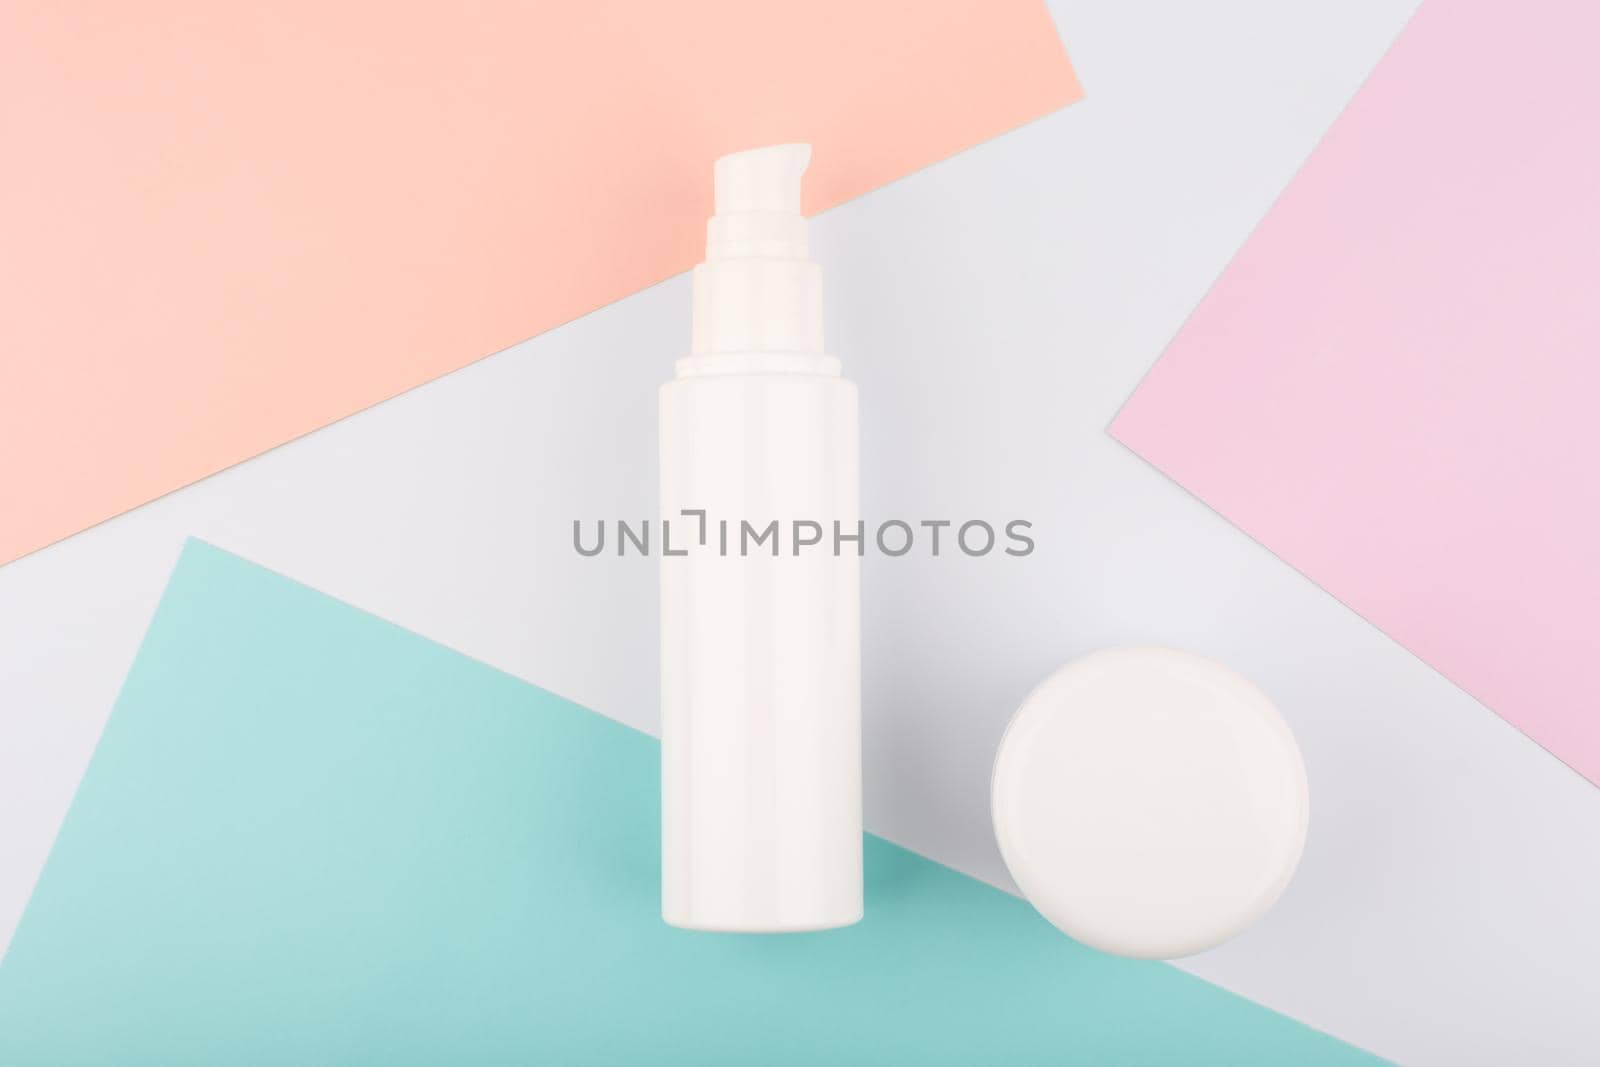 Face cream or lotion and under eye gel or lip balm on white background with colorful pieces of paper by Senorina_Irina